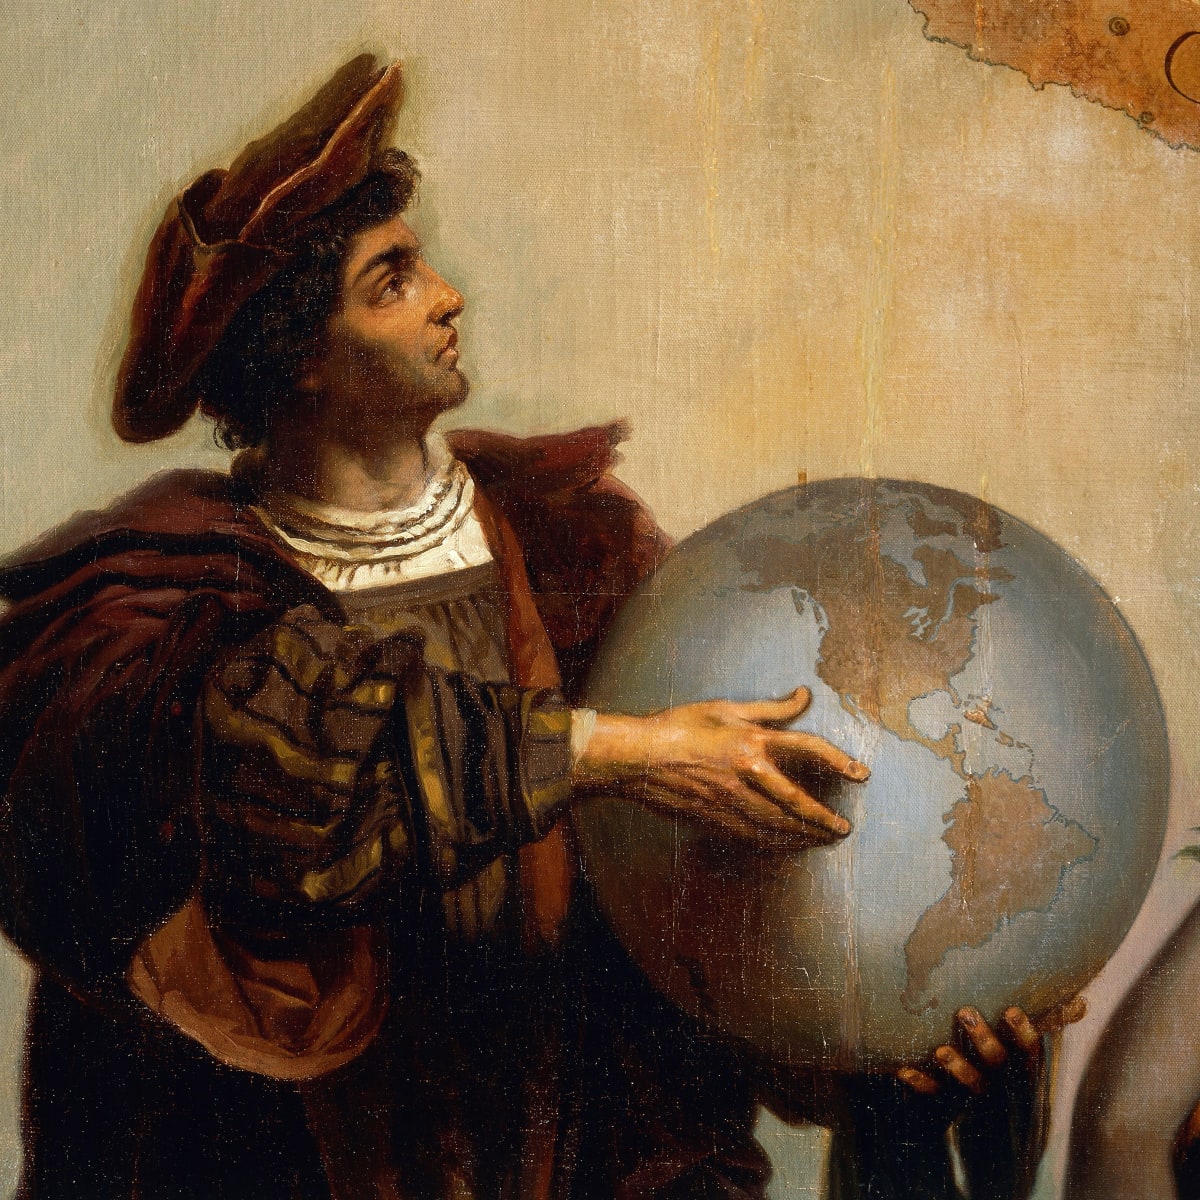 Christopher Columbus proved the Earth was round by discovering America.-u/LunarIncense